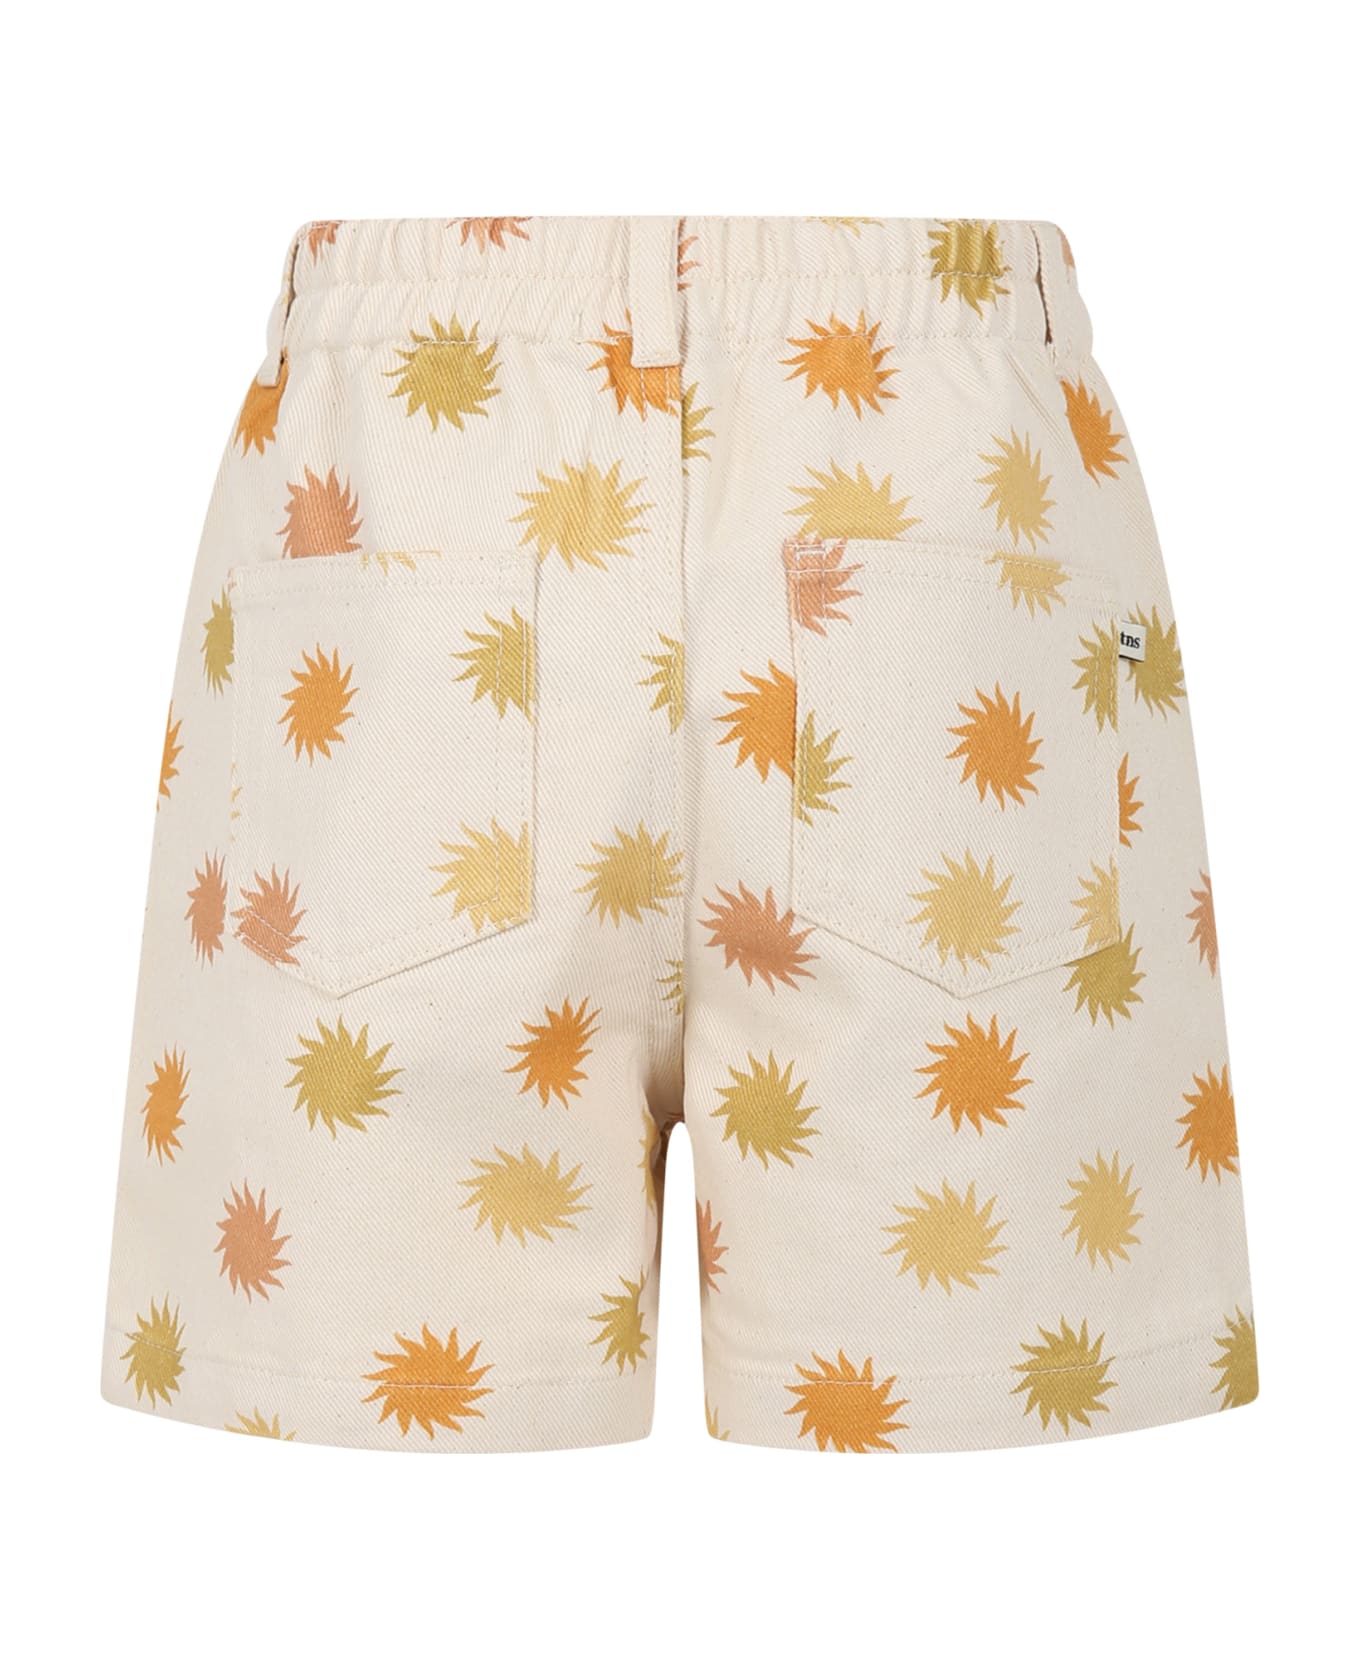 The New Society Beige Shorts For Kids With Sun Print - Beige